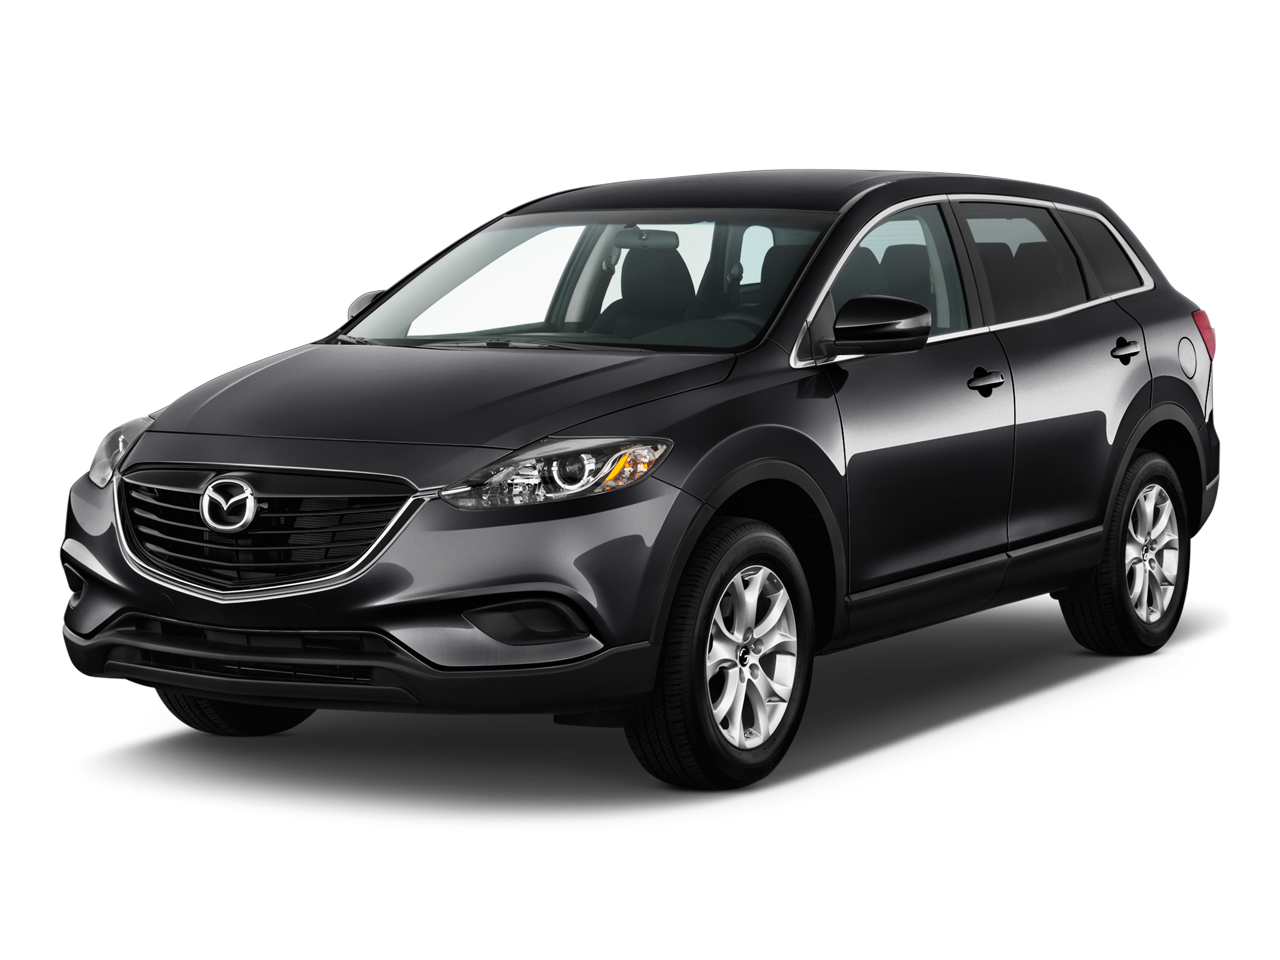 Pre-Owned One-Owner 2015 Mazda CX-9 Touring near Green Valley, AZ - Royal  Land Rover Tucson